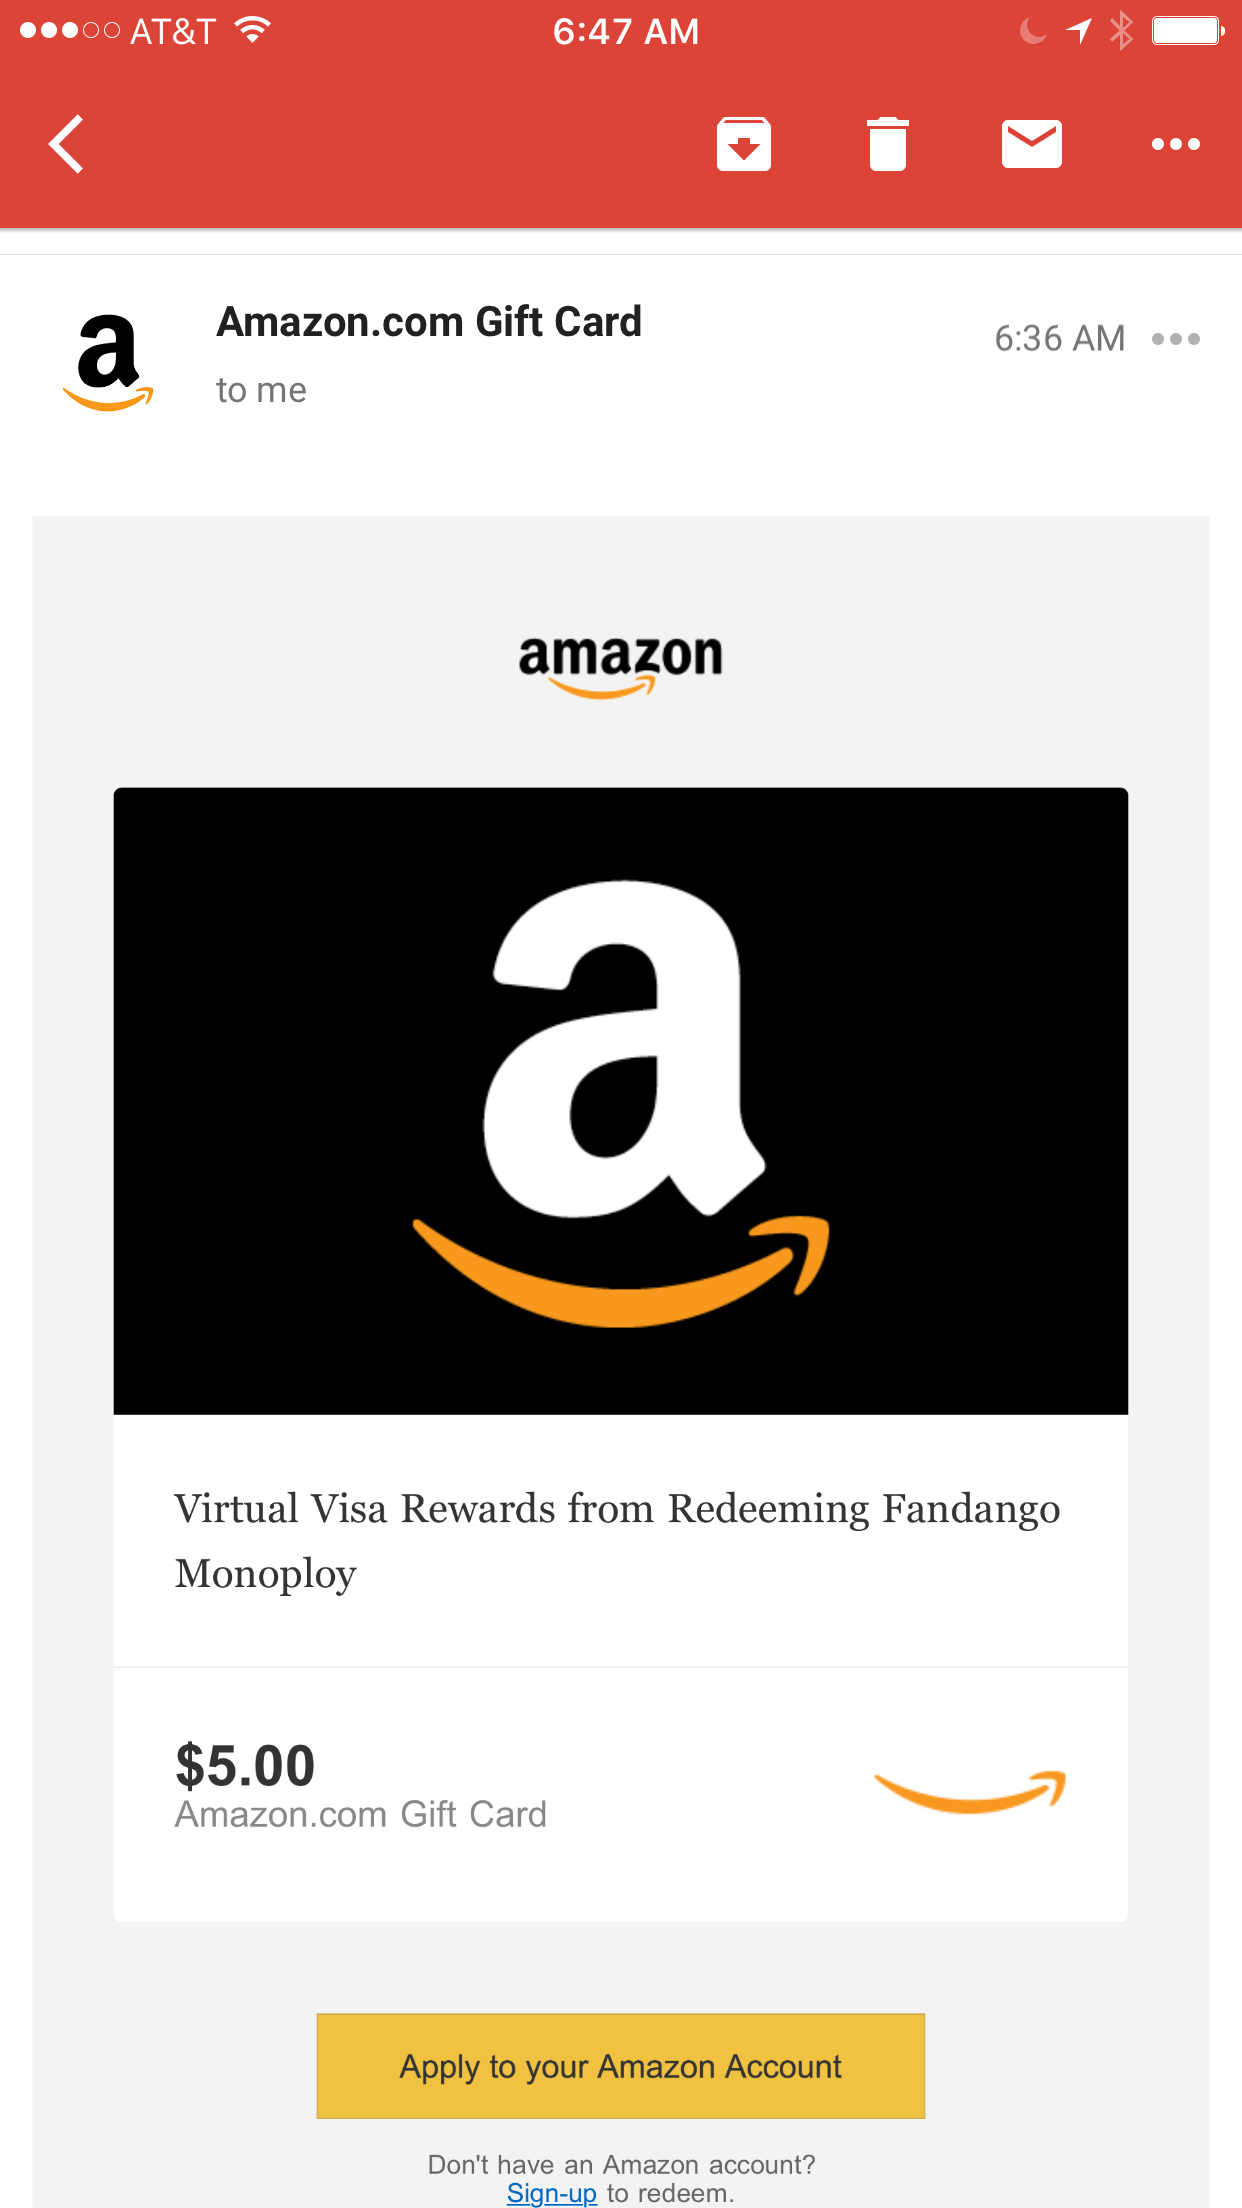 how-to-redeem-your-monopoly-fandango-rewards-for-amazon-gift-cards